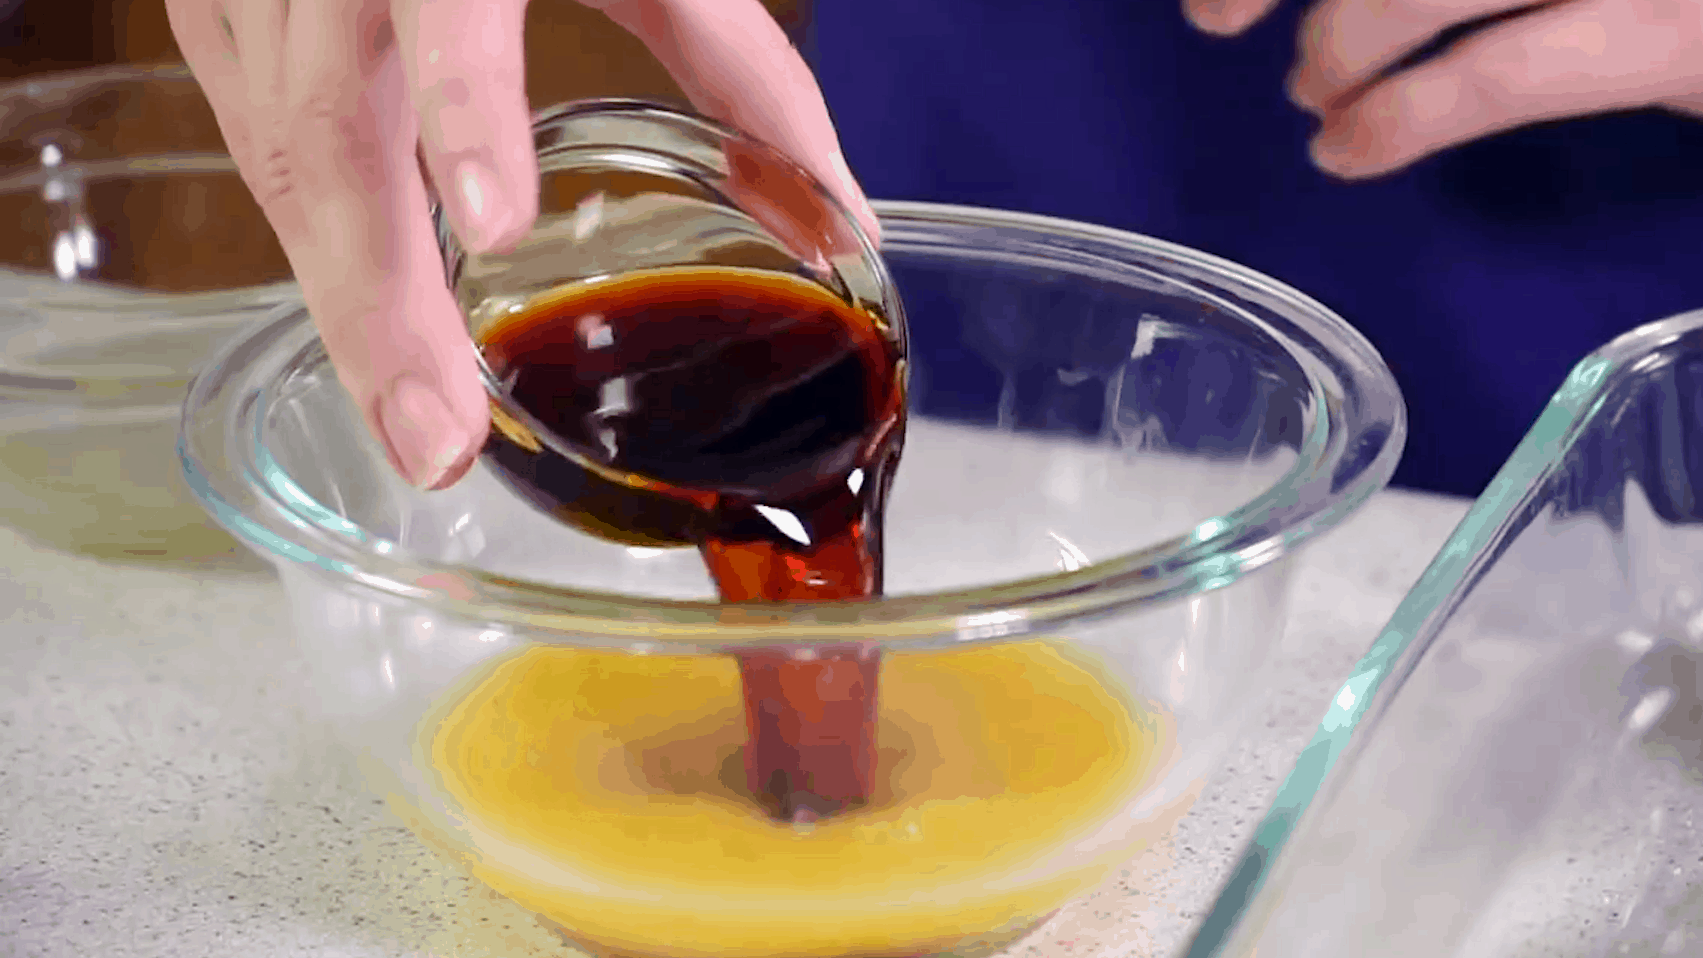 Small glass bowl of soy sauce being poured into a larger glass bowl with orange juice in it